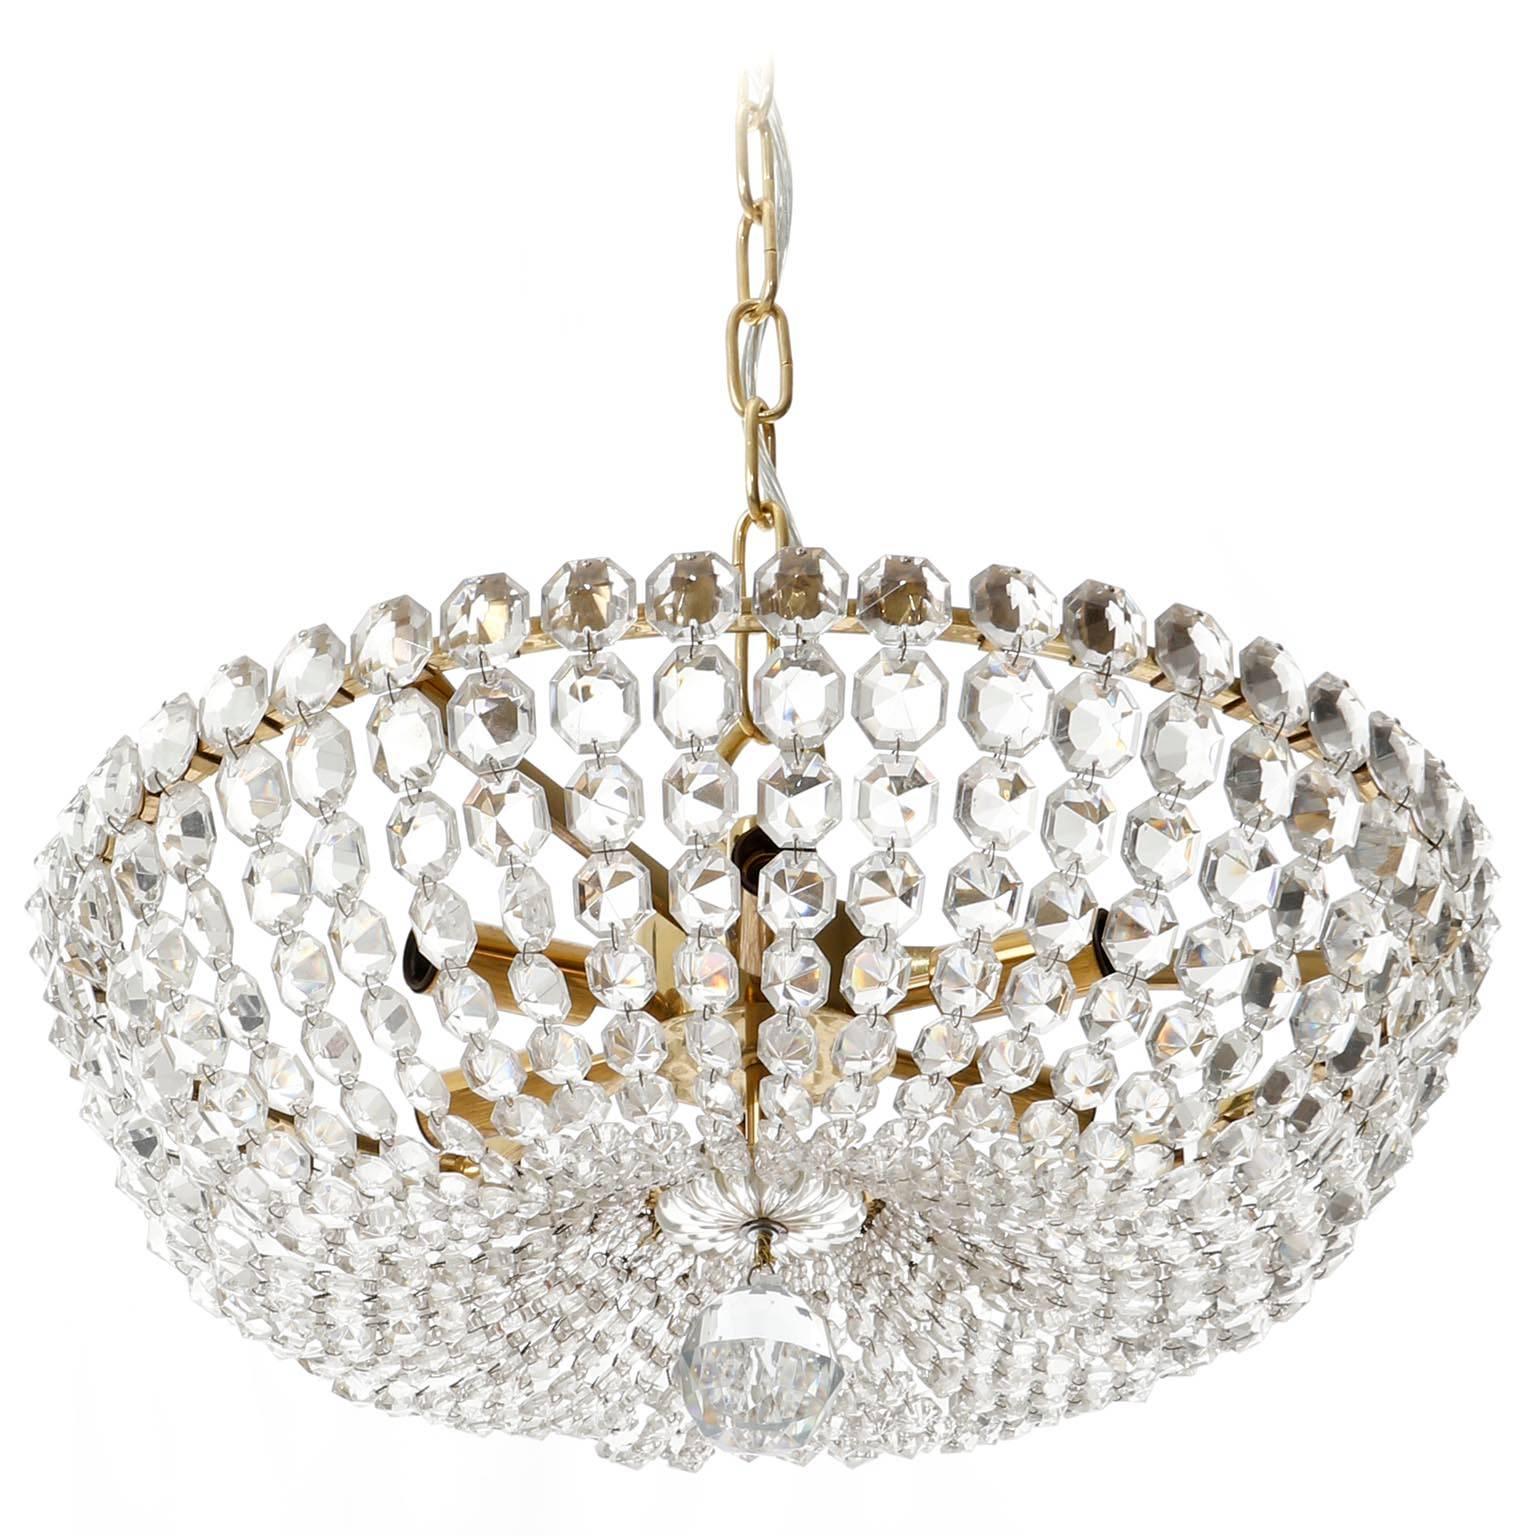 A beautiful basket light fixture model no. '6276 B' by J.L. Lobmeyr, Vienna, Austria, manufactured in Mid-Century, circa 1960 (late 1950s or early 1960s).
It is made of brass and hand cut diamond shaped crystal glass. Outstanding workmanship, a high